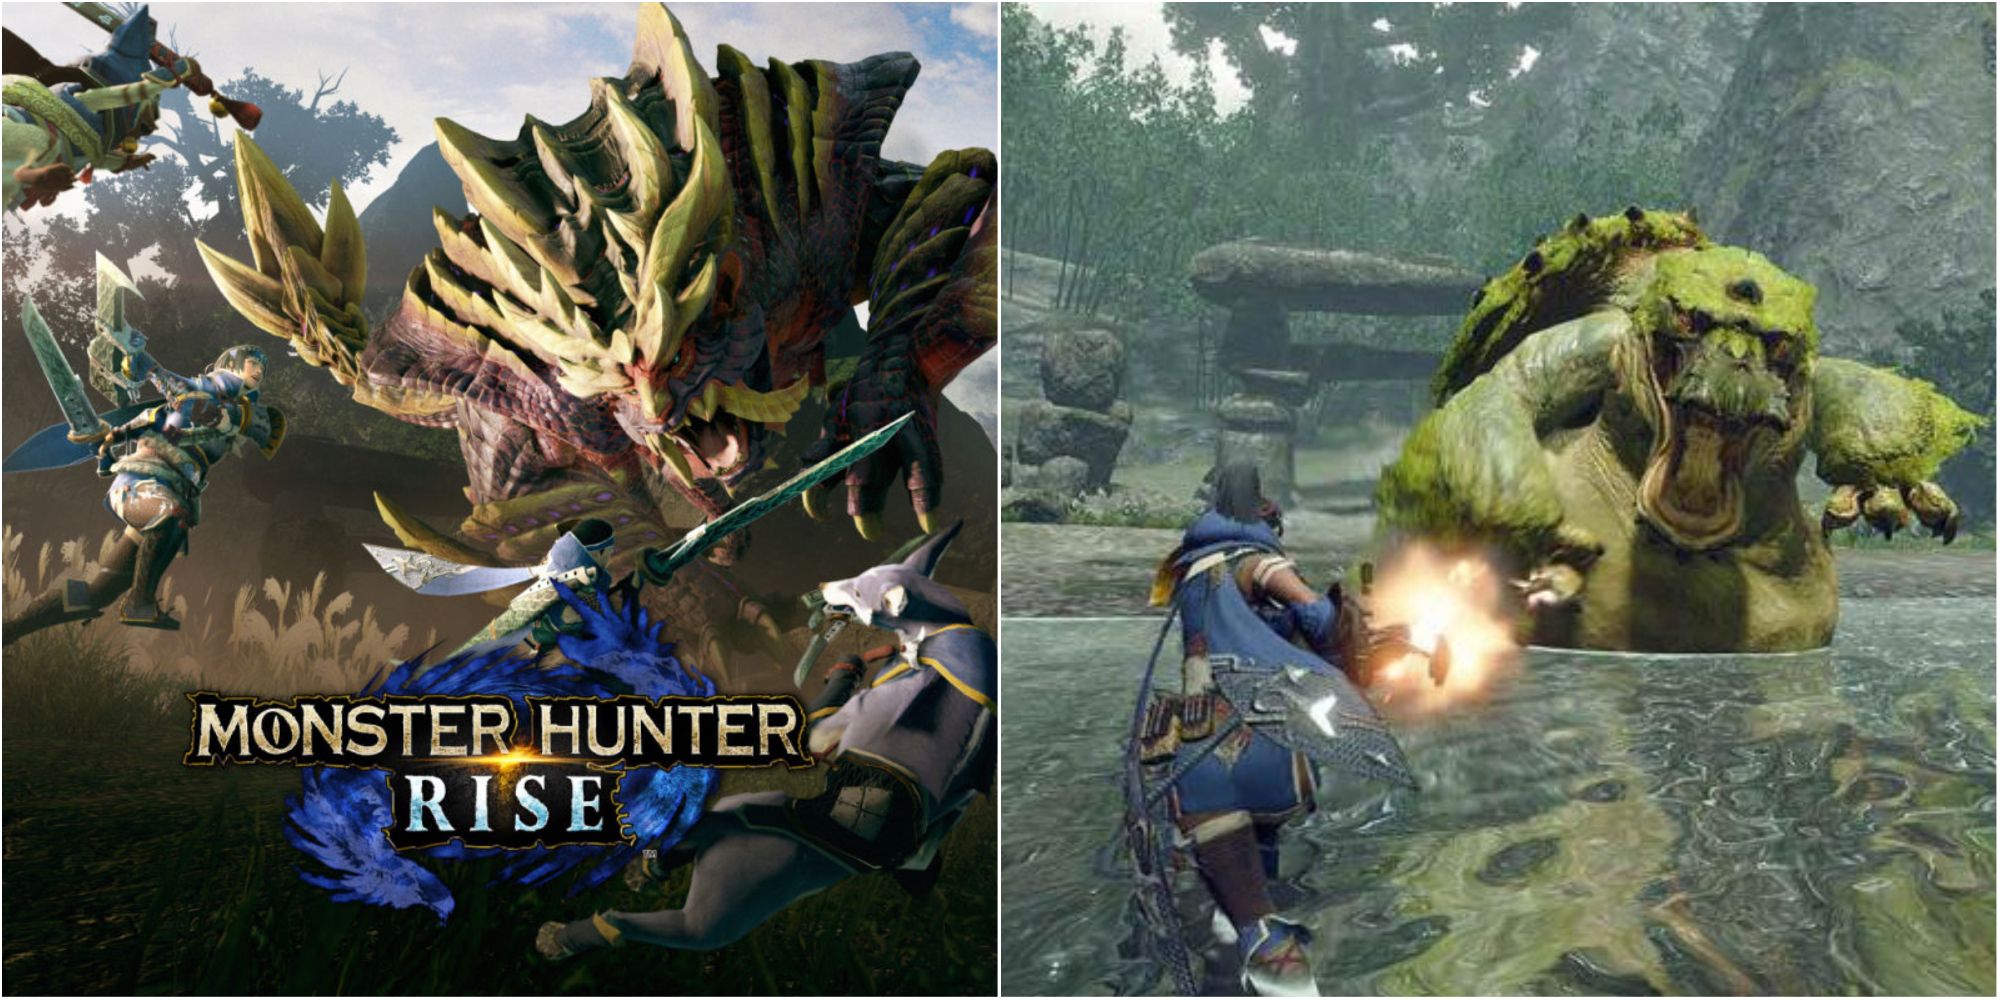 monster hunter rise cover art and gameplay